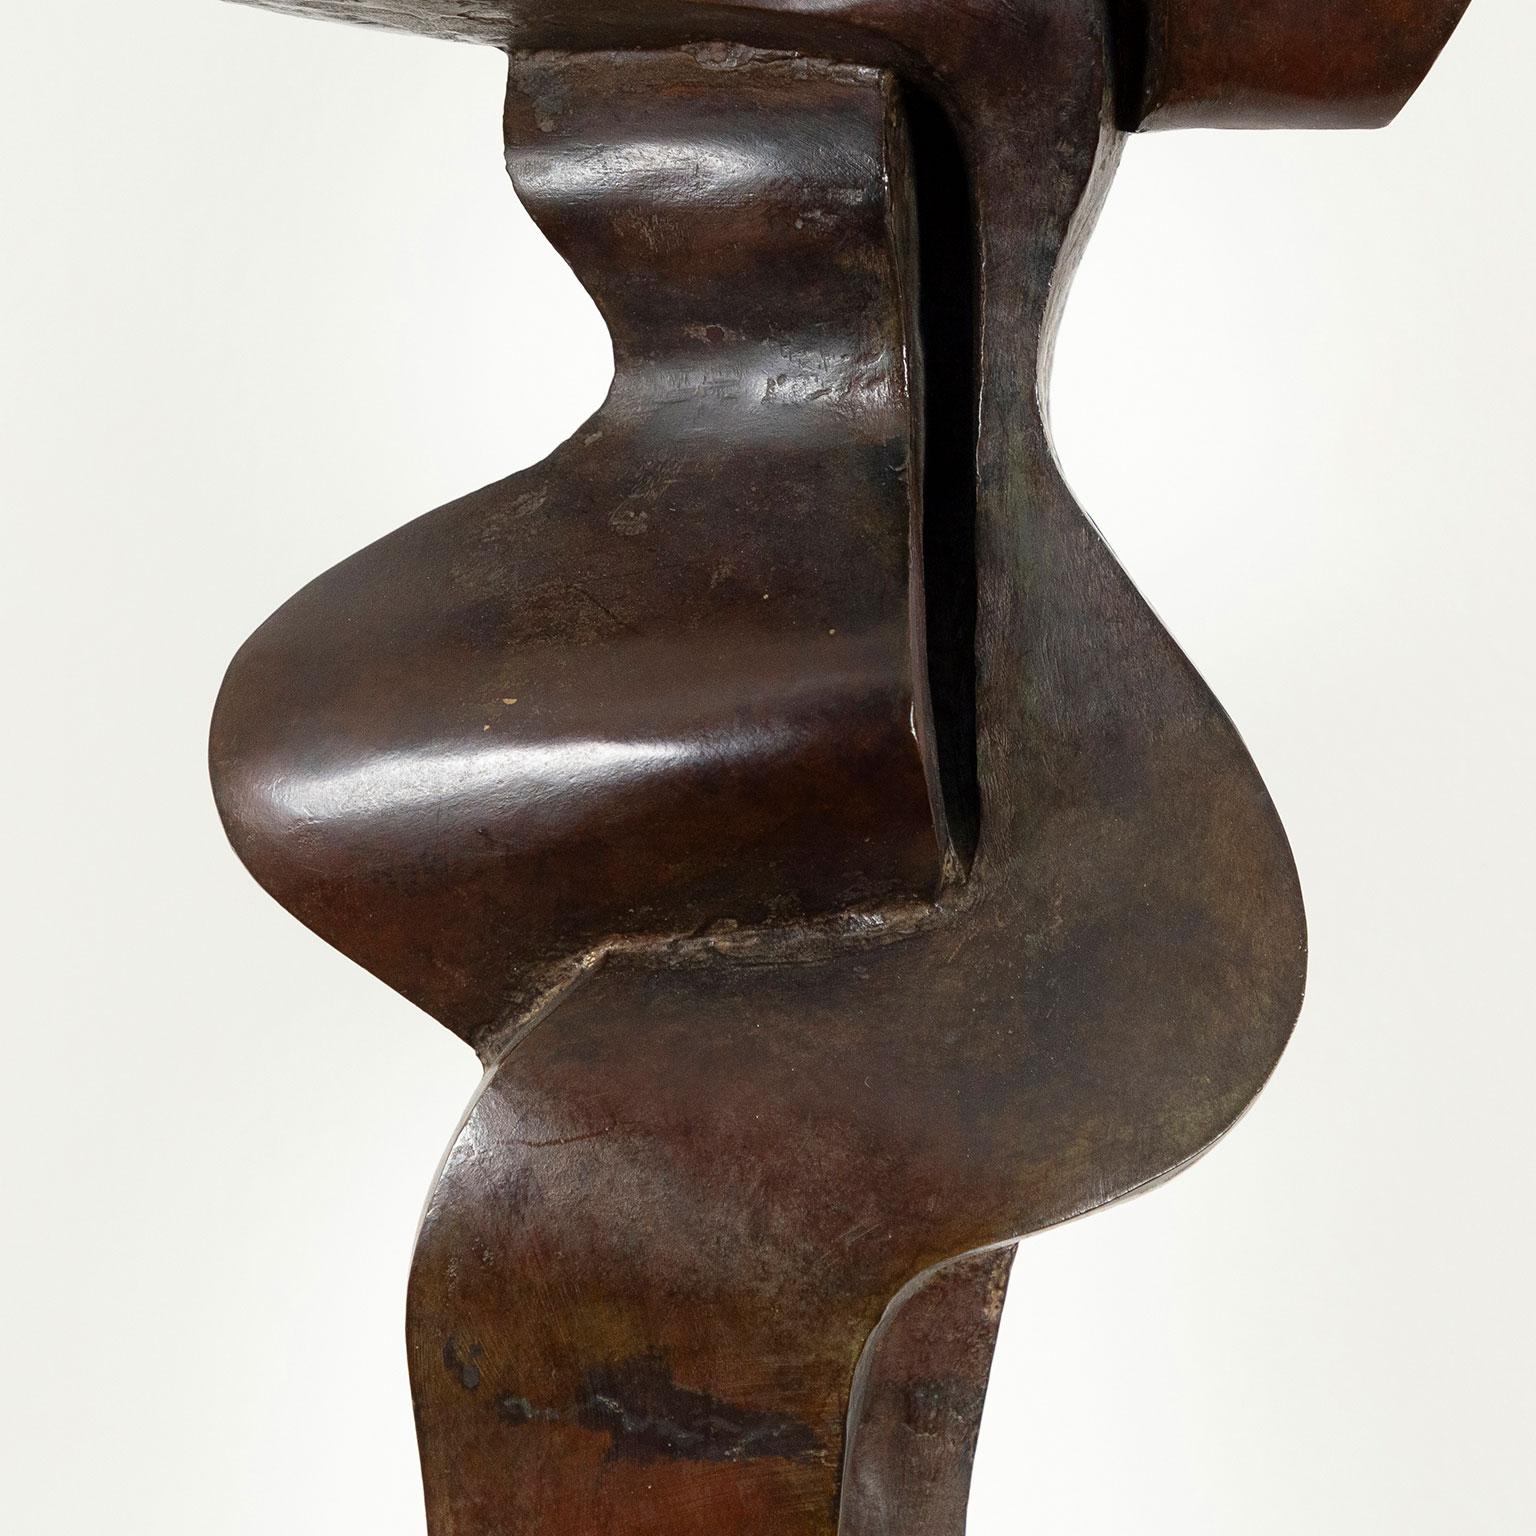 Sorel Etrog (1933 - 2014) is arguably Canada's most famous sculptor. 

Etrog's work is defined by existential themes surrounding the human experience. Exploring paradoxical concepts such as the innate yearning for connection and the inevitability of